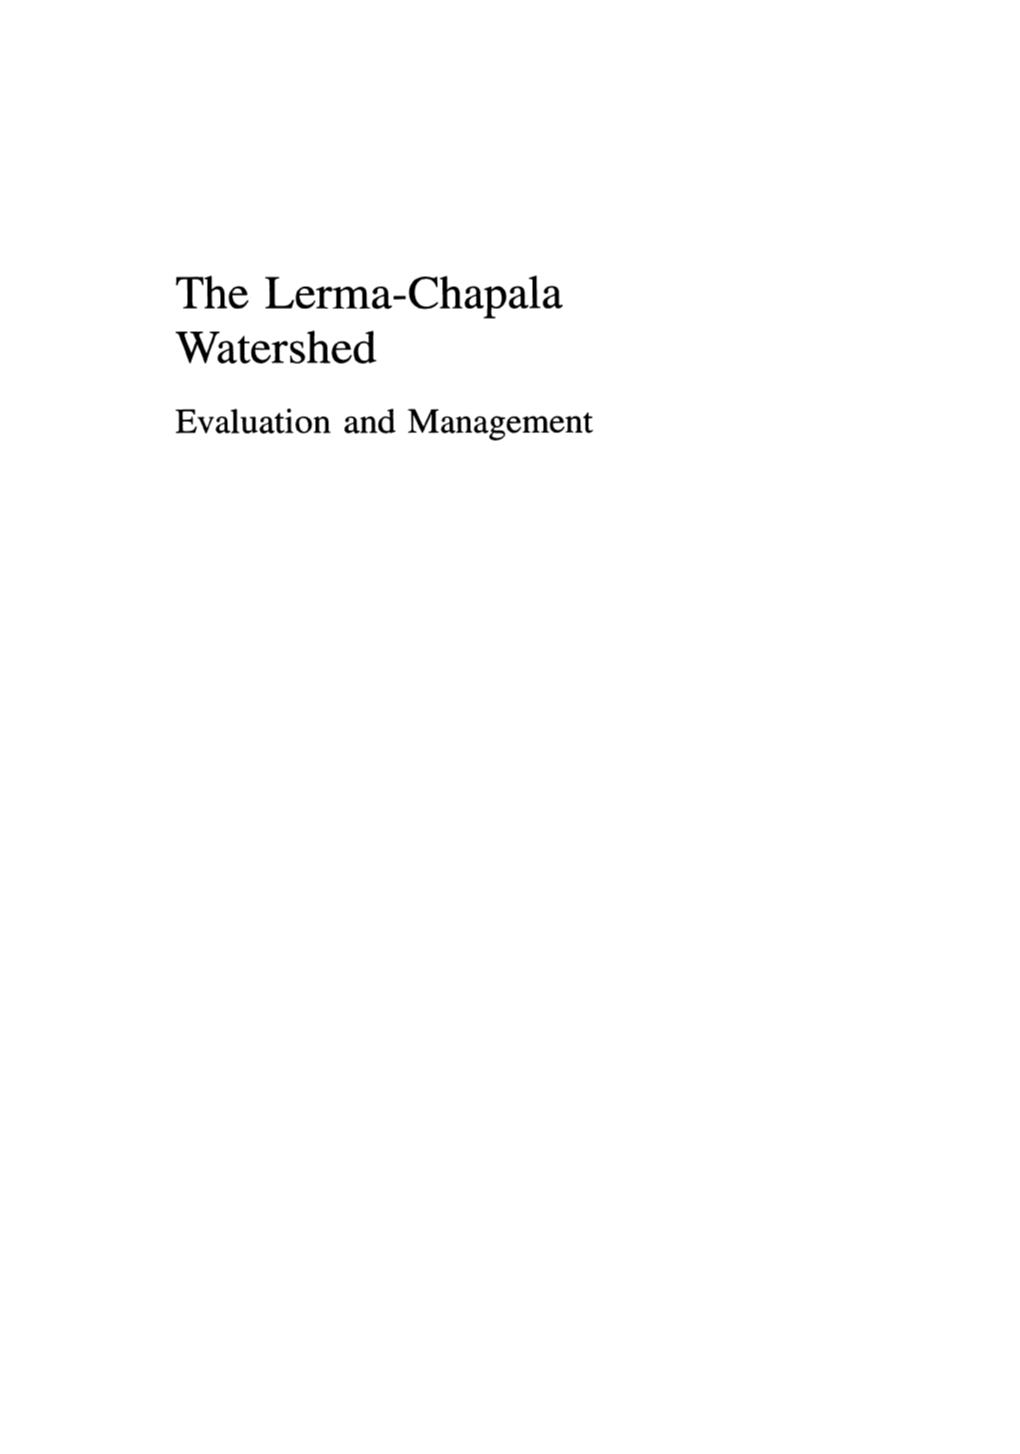 The Lerma-Chapala Watershed Evaluation and Management the Lerrna-Chapala Watershed Evaluation and Management